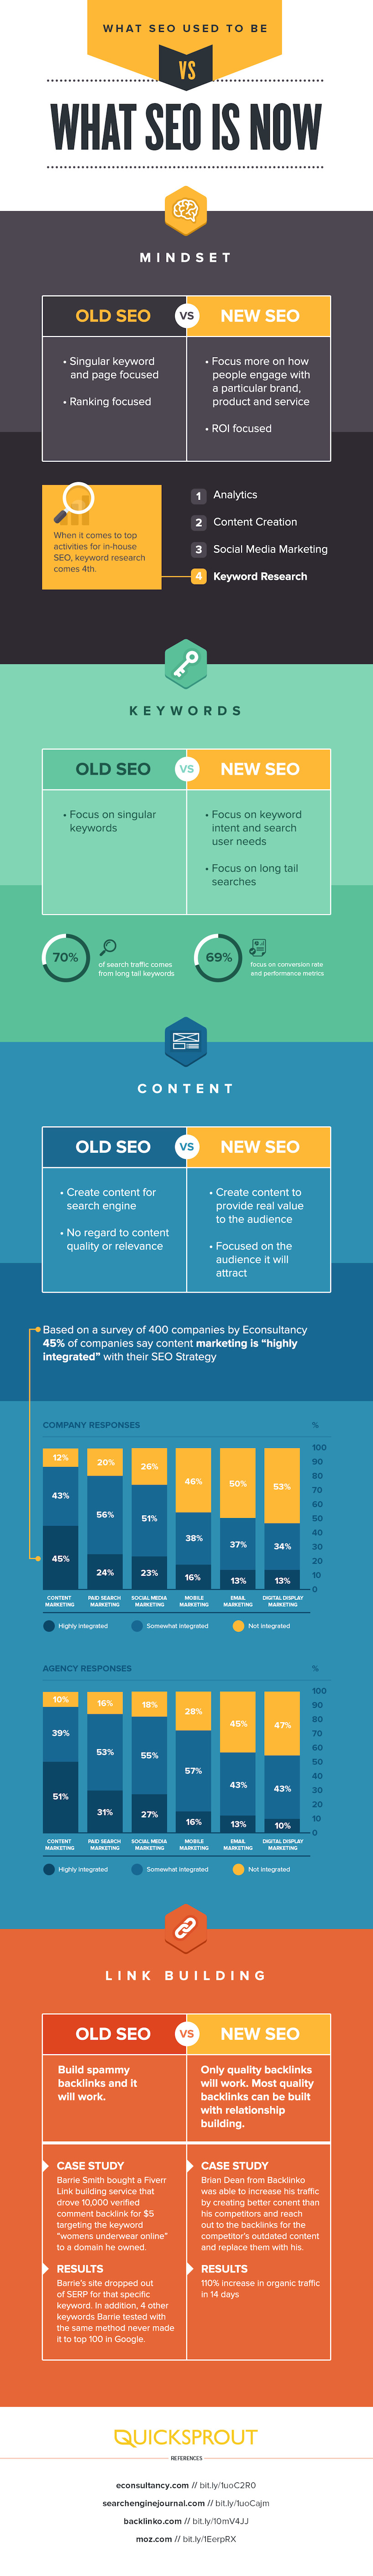 What SEO Used to Be Versus What SEO Is Now infographic